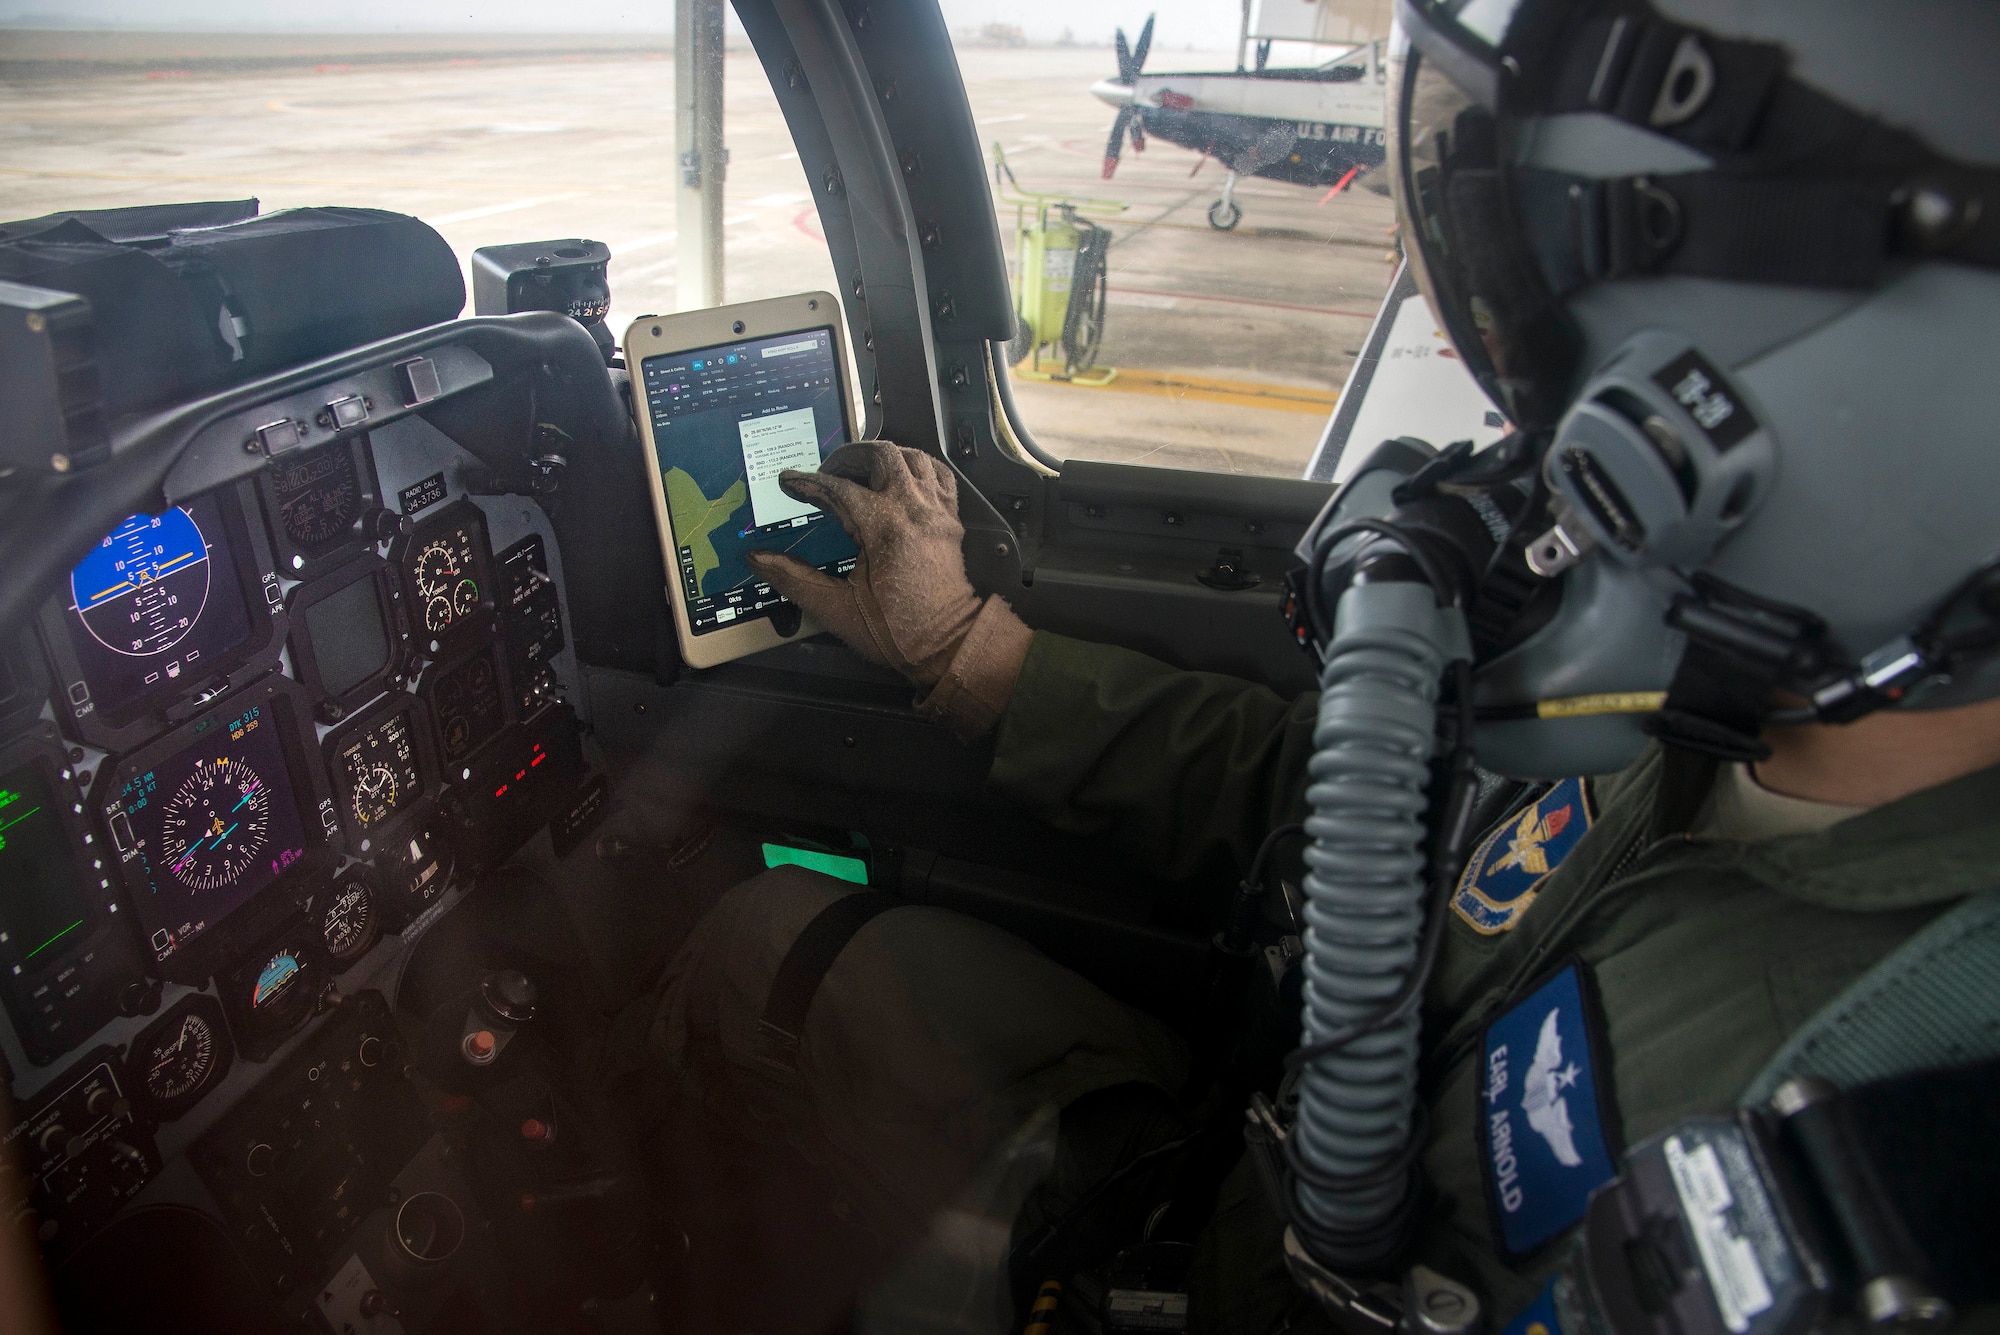 Aircrews throughout Air Education and Training Command will soon be benefiting from a test program spearheaded by Joint Base San Antonio-Randolph’s 12th Operations Group that will improve information management in the cockpit.